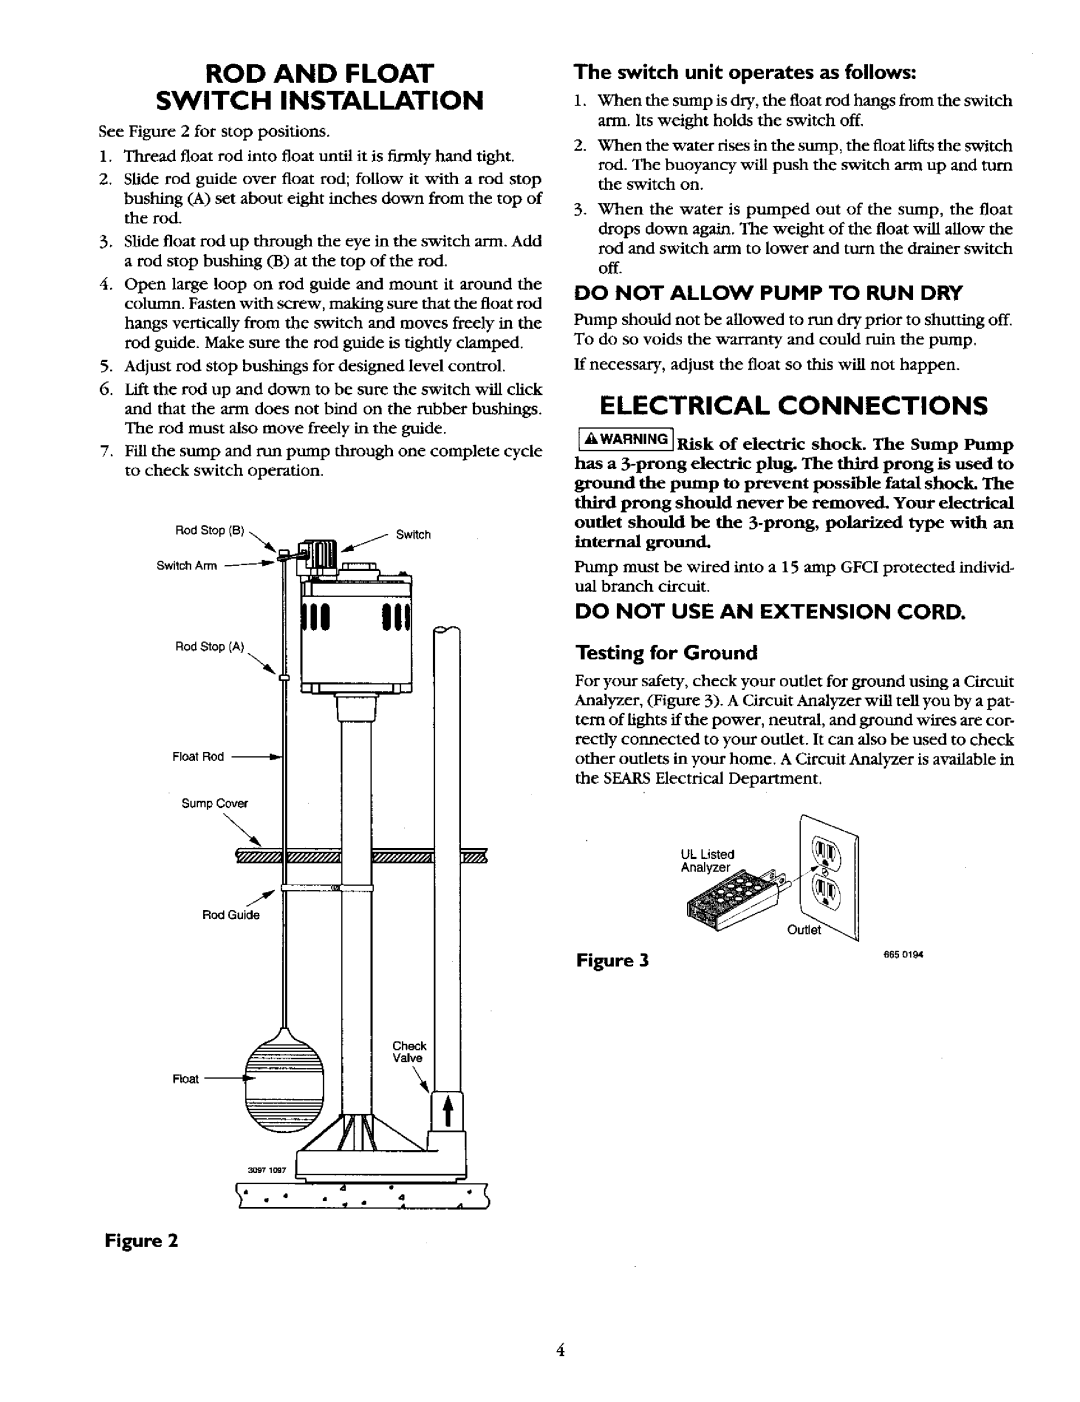 Sears 390.303491 III Ill, Rod And Float Switch Installation, Electrical Connections, Do Not Allow Pump To Run Dry 